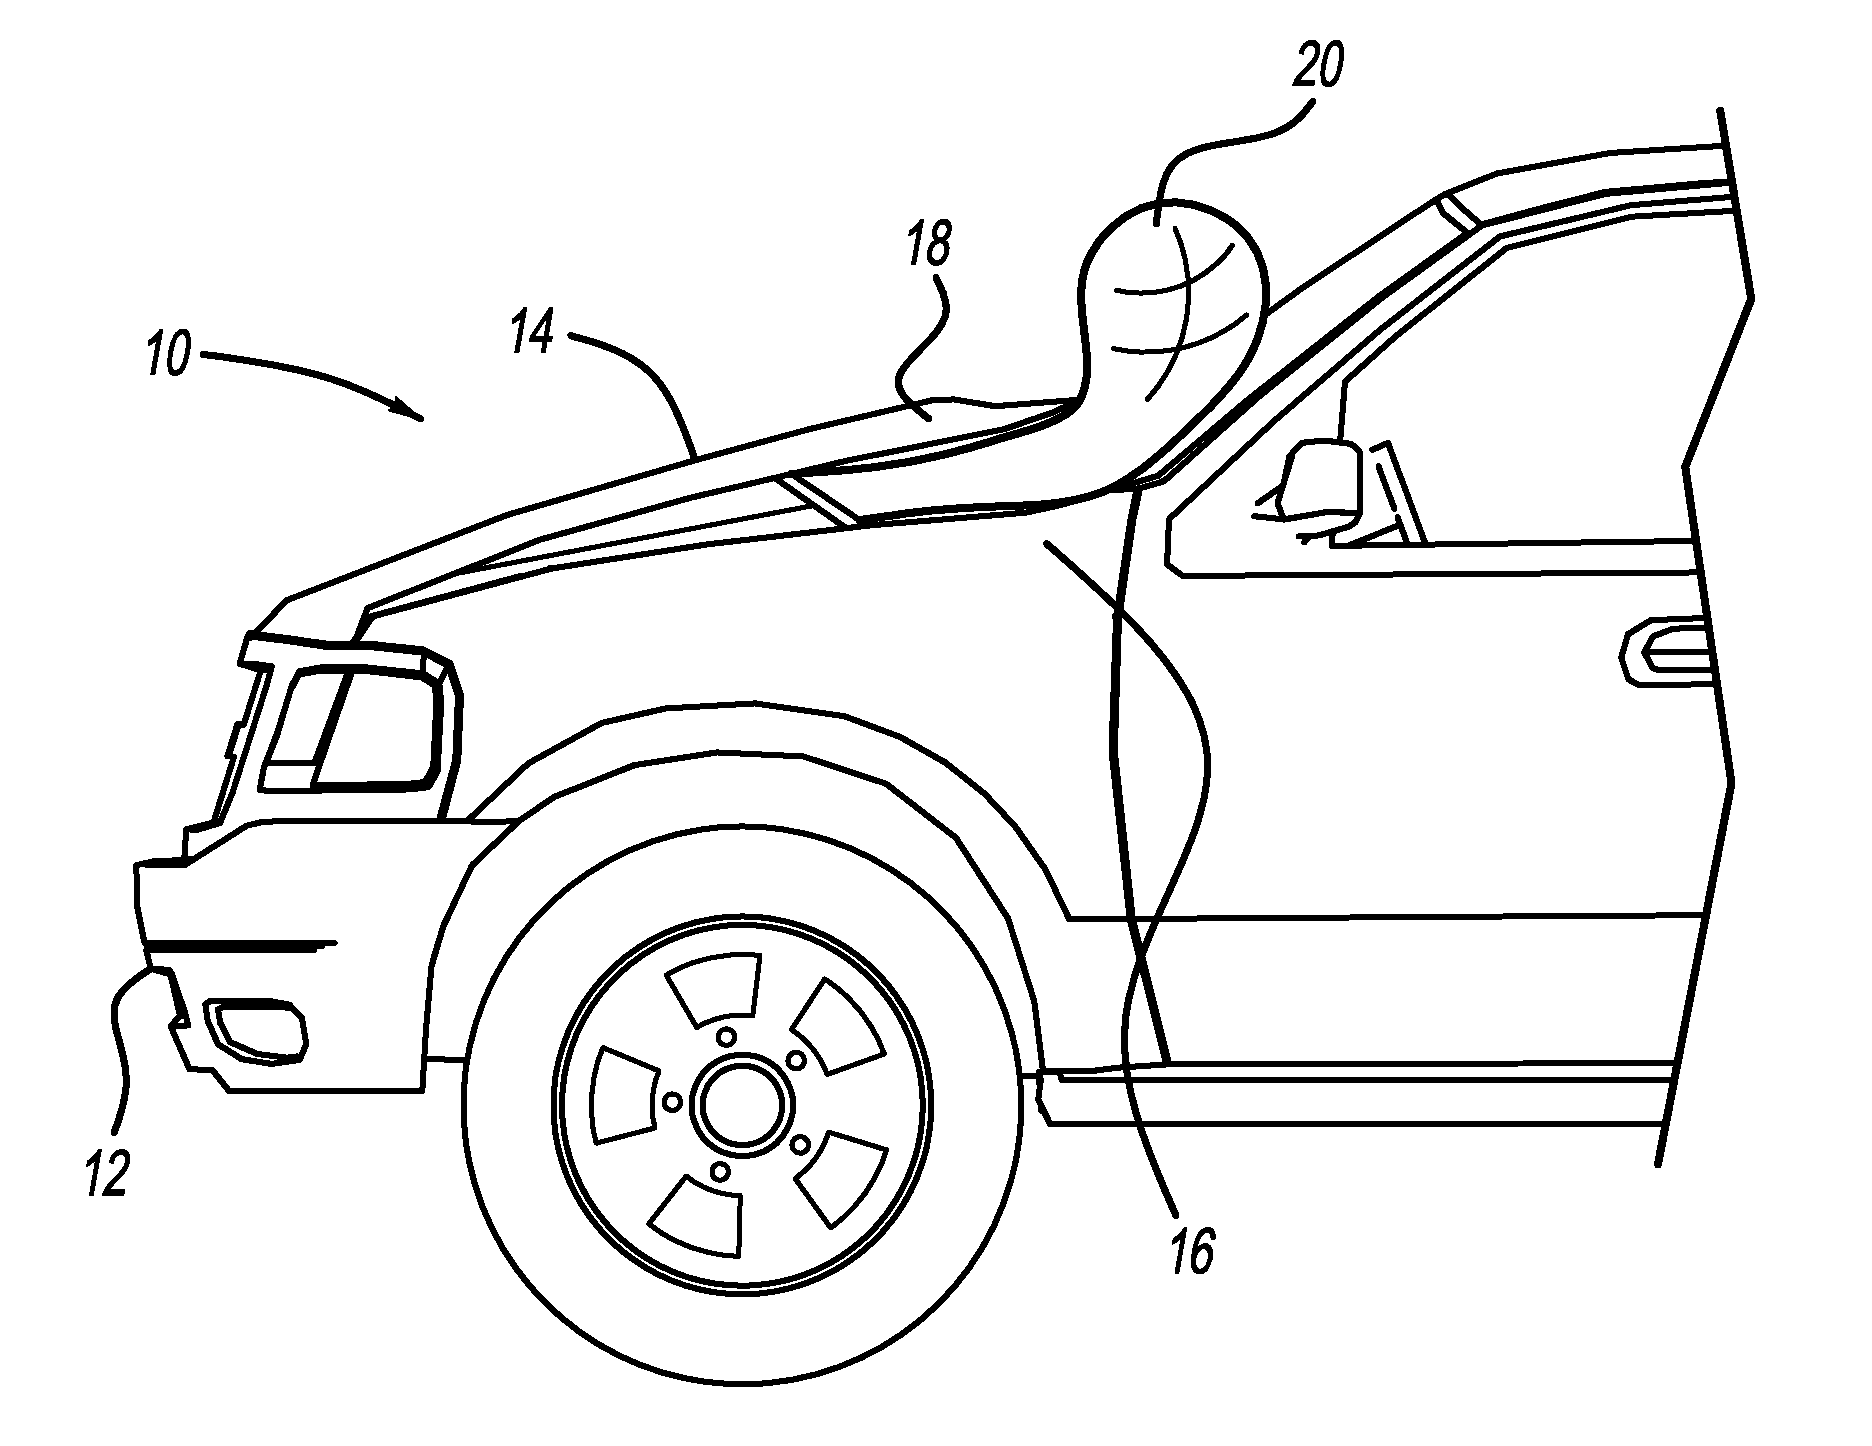 Pedestrian protection sensing system for vehicle having metal bumpers